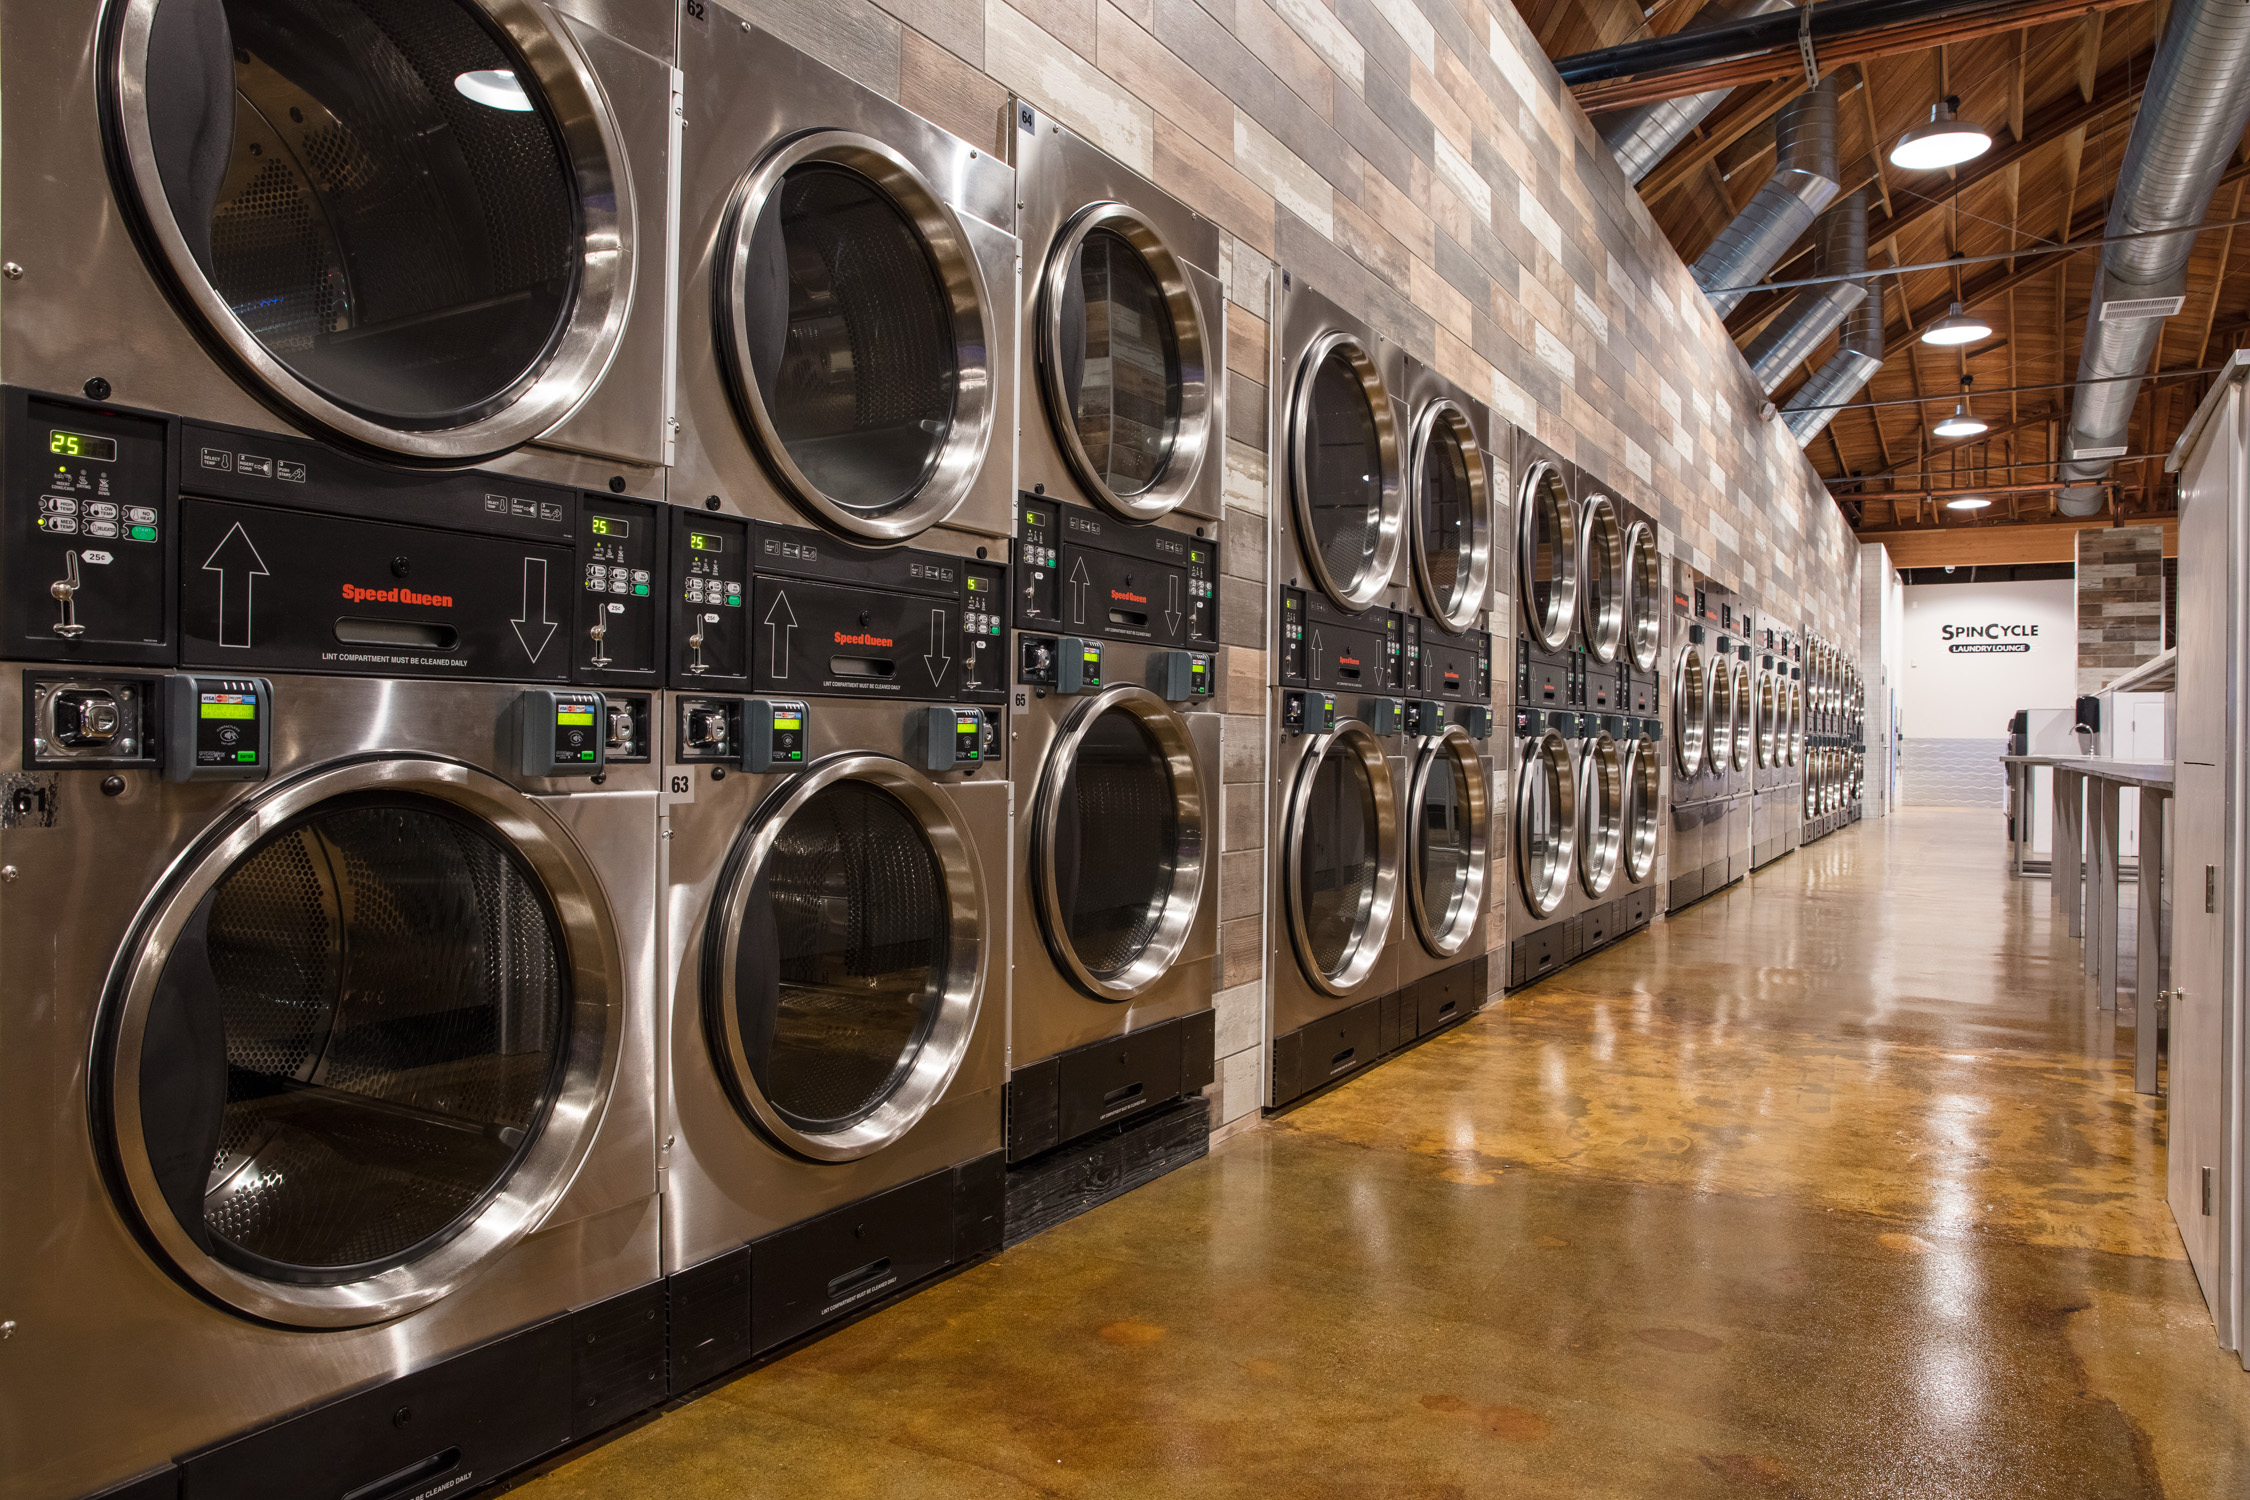 Stack dryers